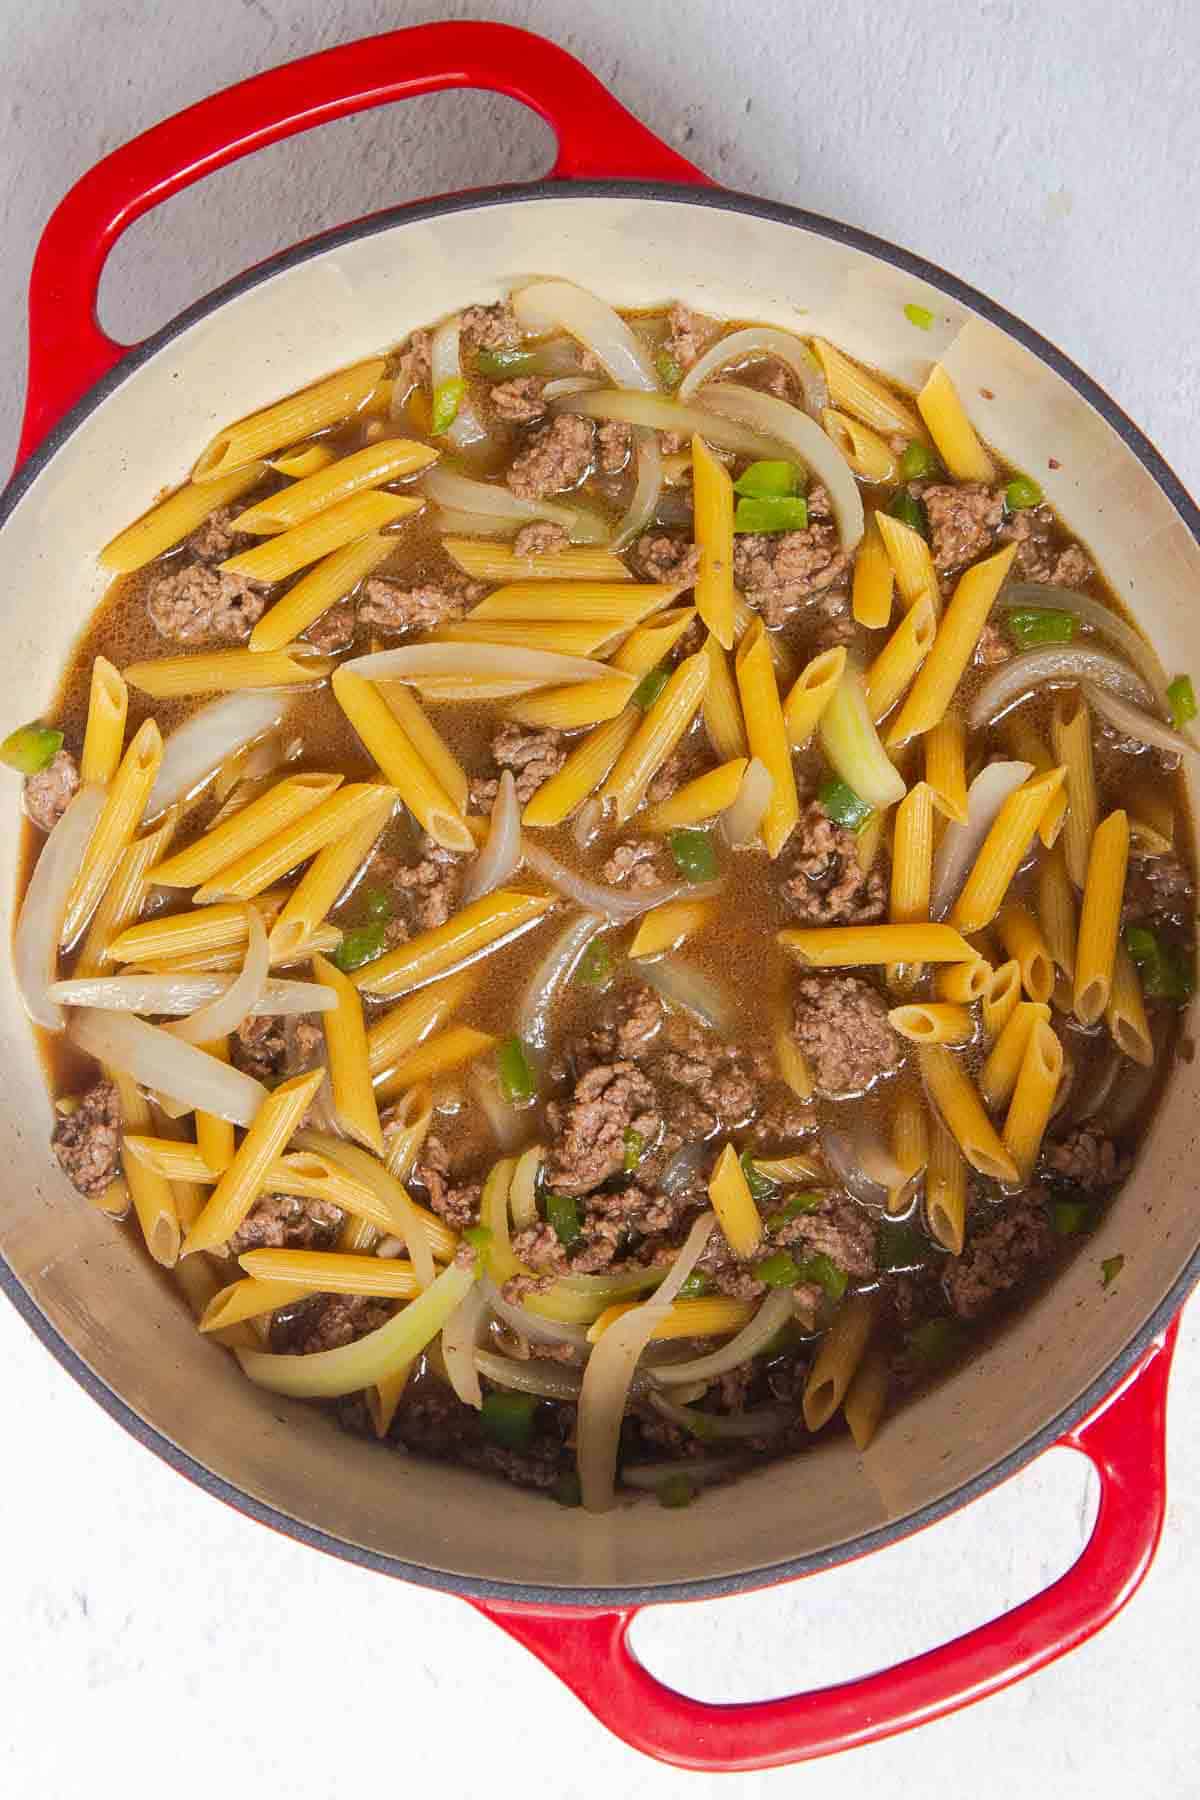 Uncooked pasta and beef broth are added to the meat mixture in the large pot